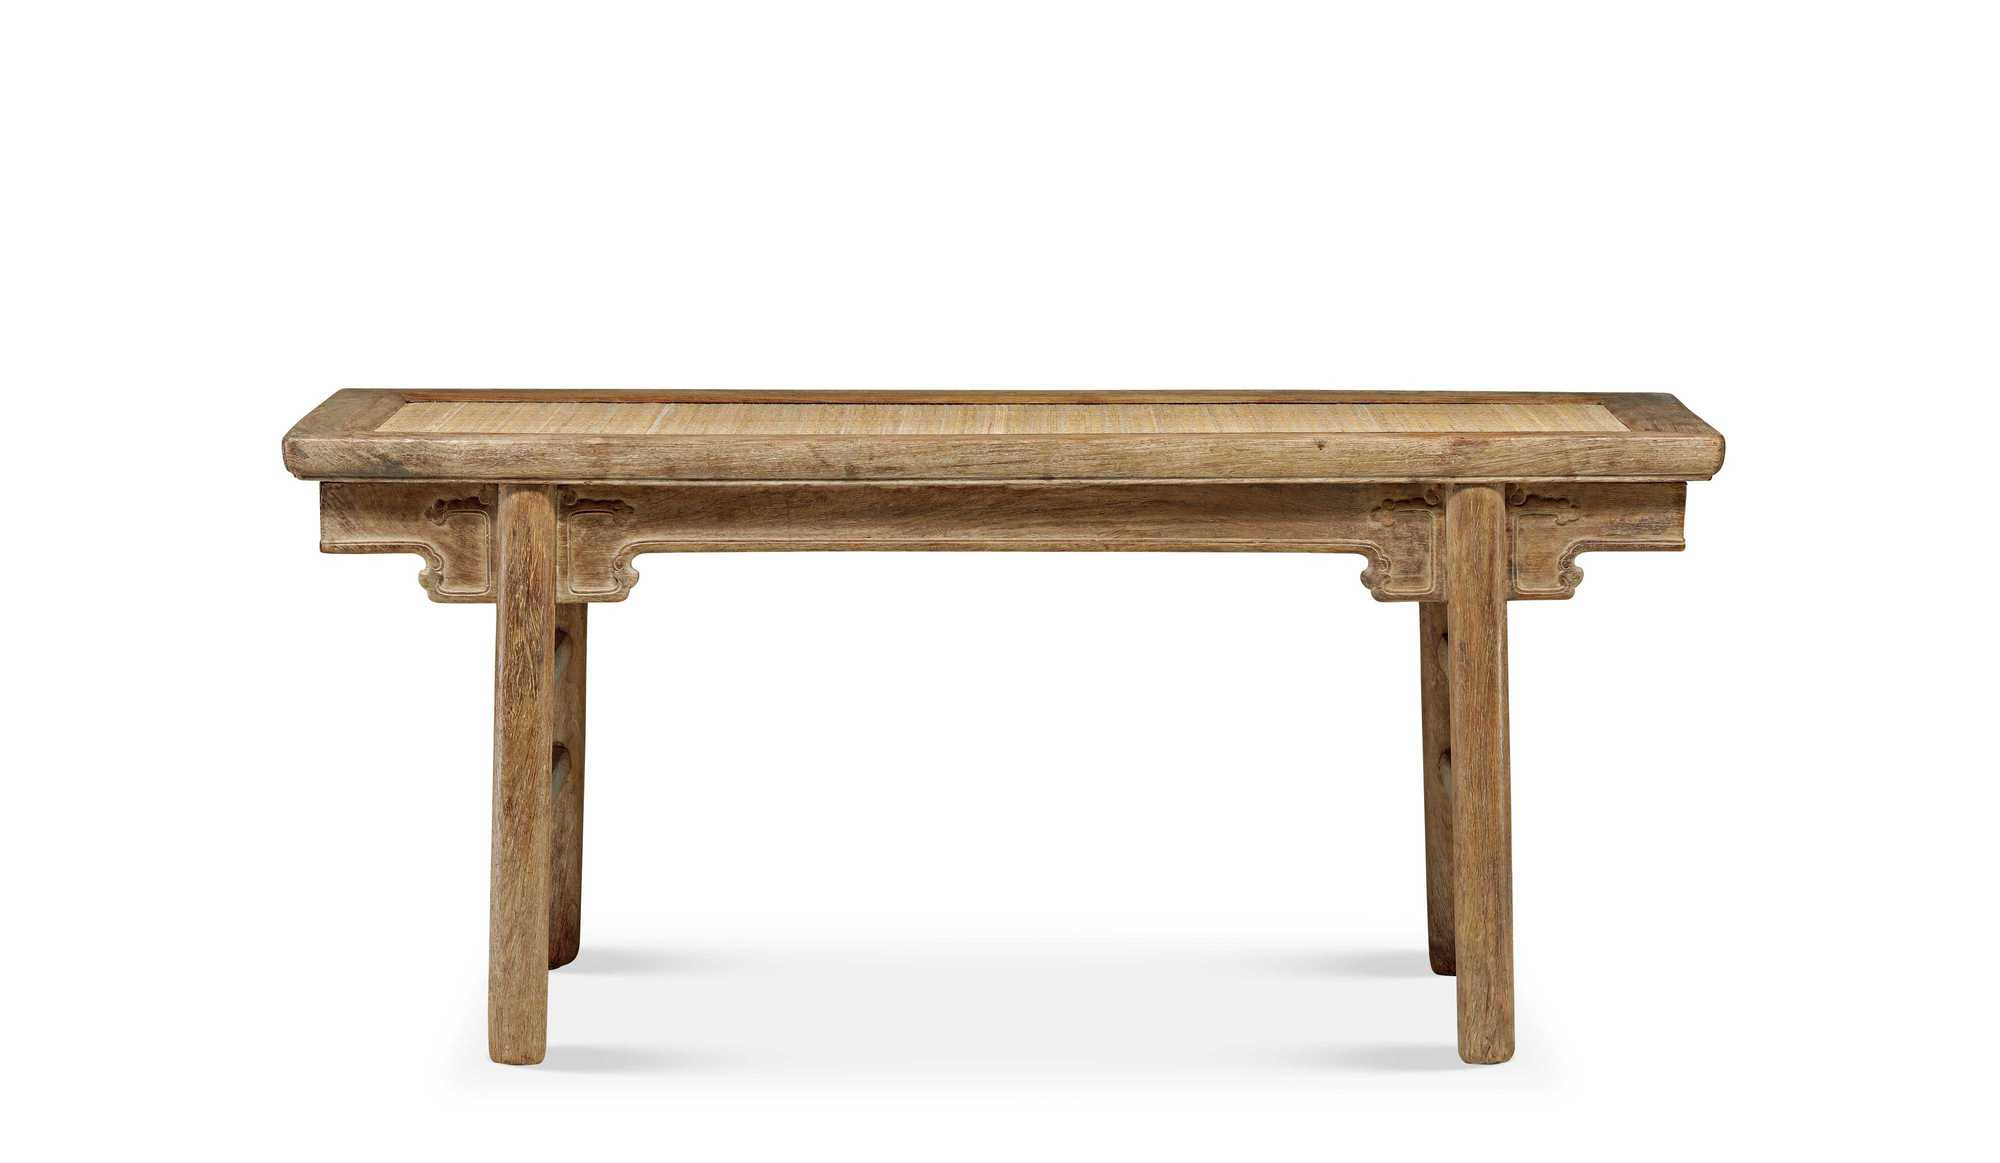 HUANGHUALI WOODEN ELONGATED BRIDLE JOINT BENCH